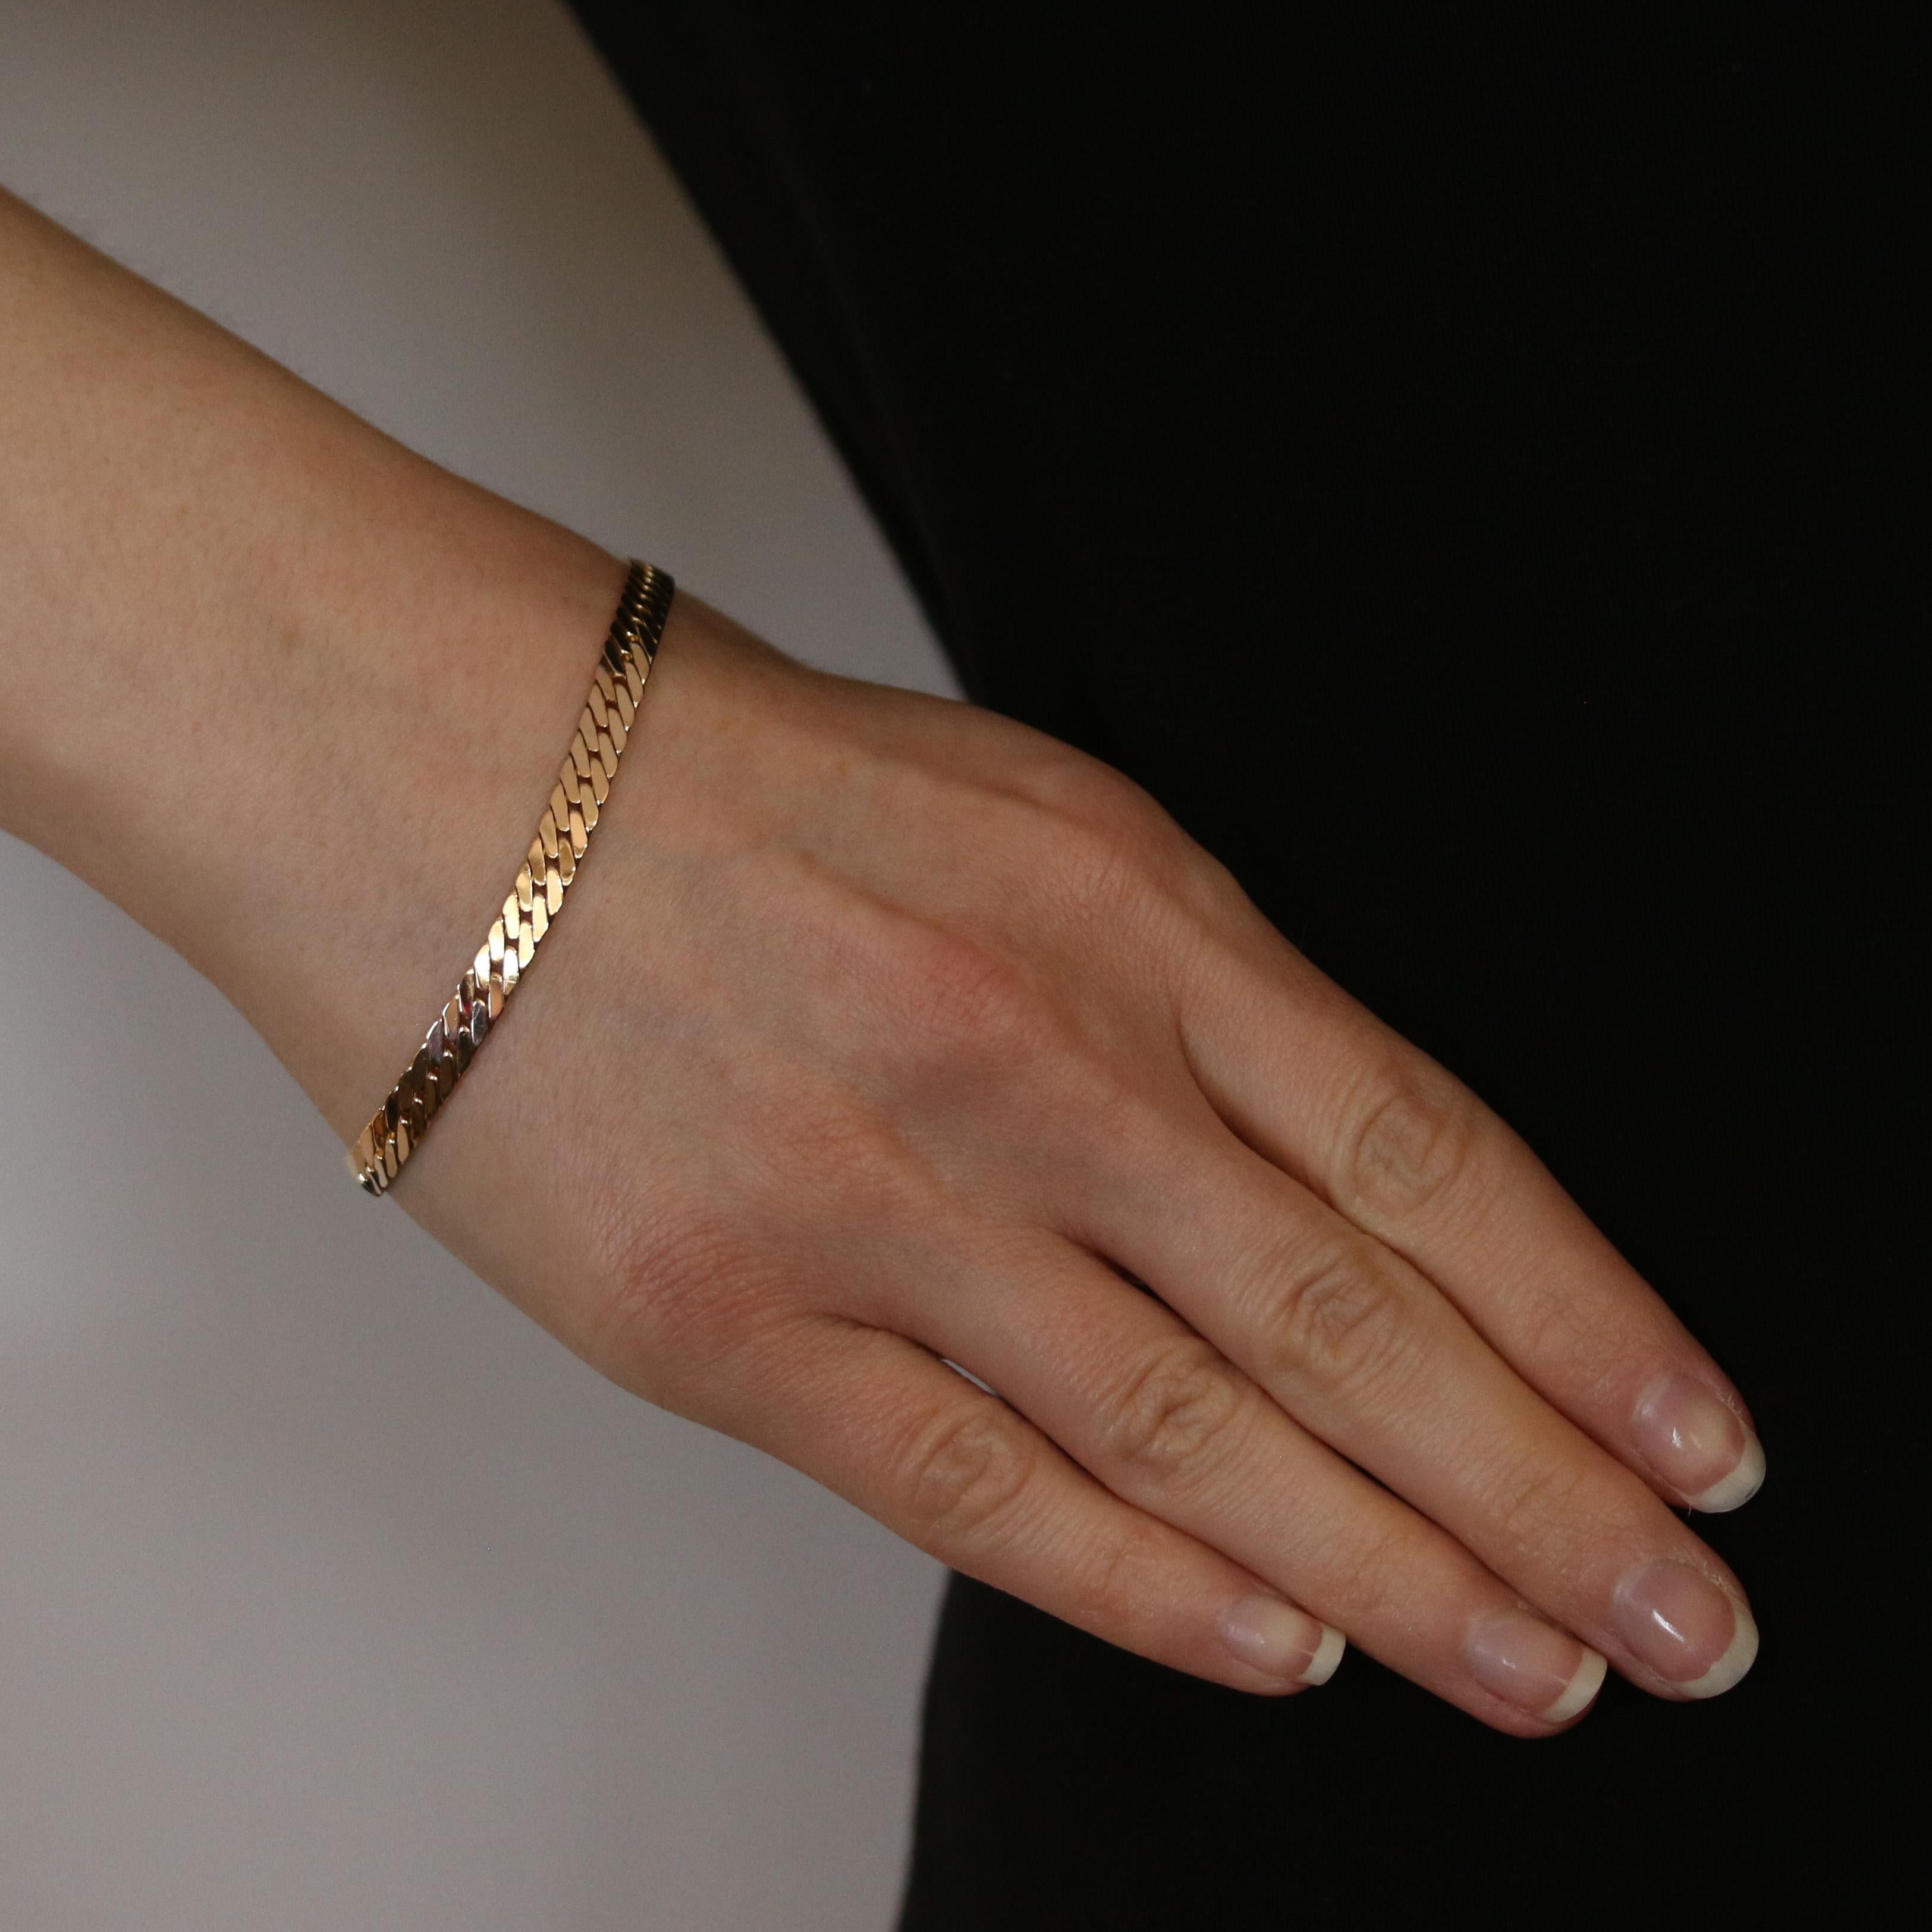 Metal Content: 14k Yellow Gold 

Bracelet Style: Chain 
Chain Style: Flat Curb 
Fastening Type: Tab Box Clasp with Side Safety Clasp

Measurements: 
Length: 7 1/4